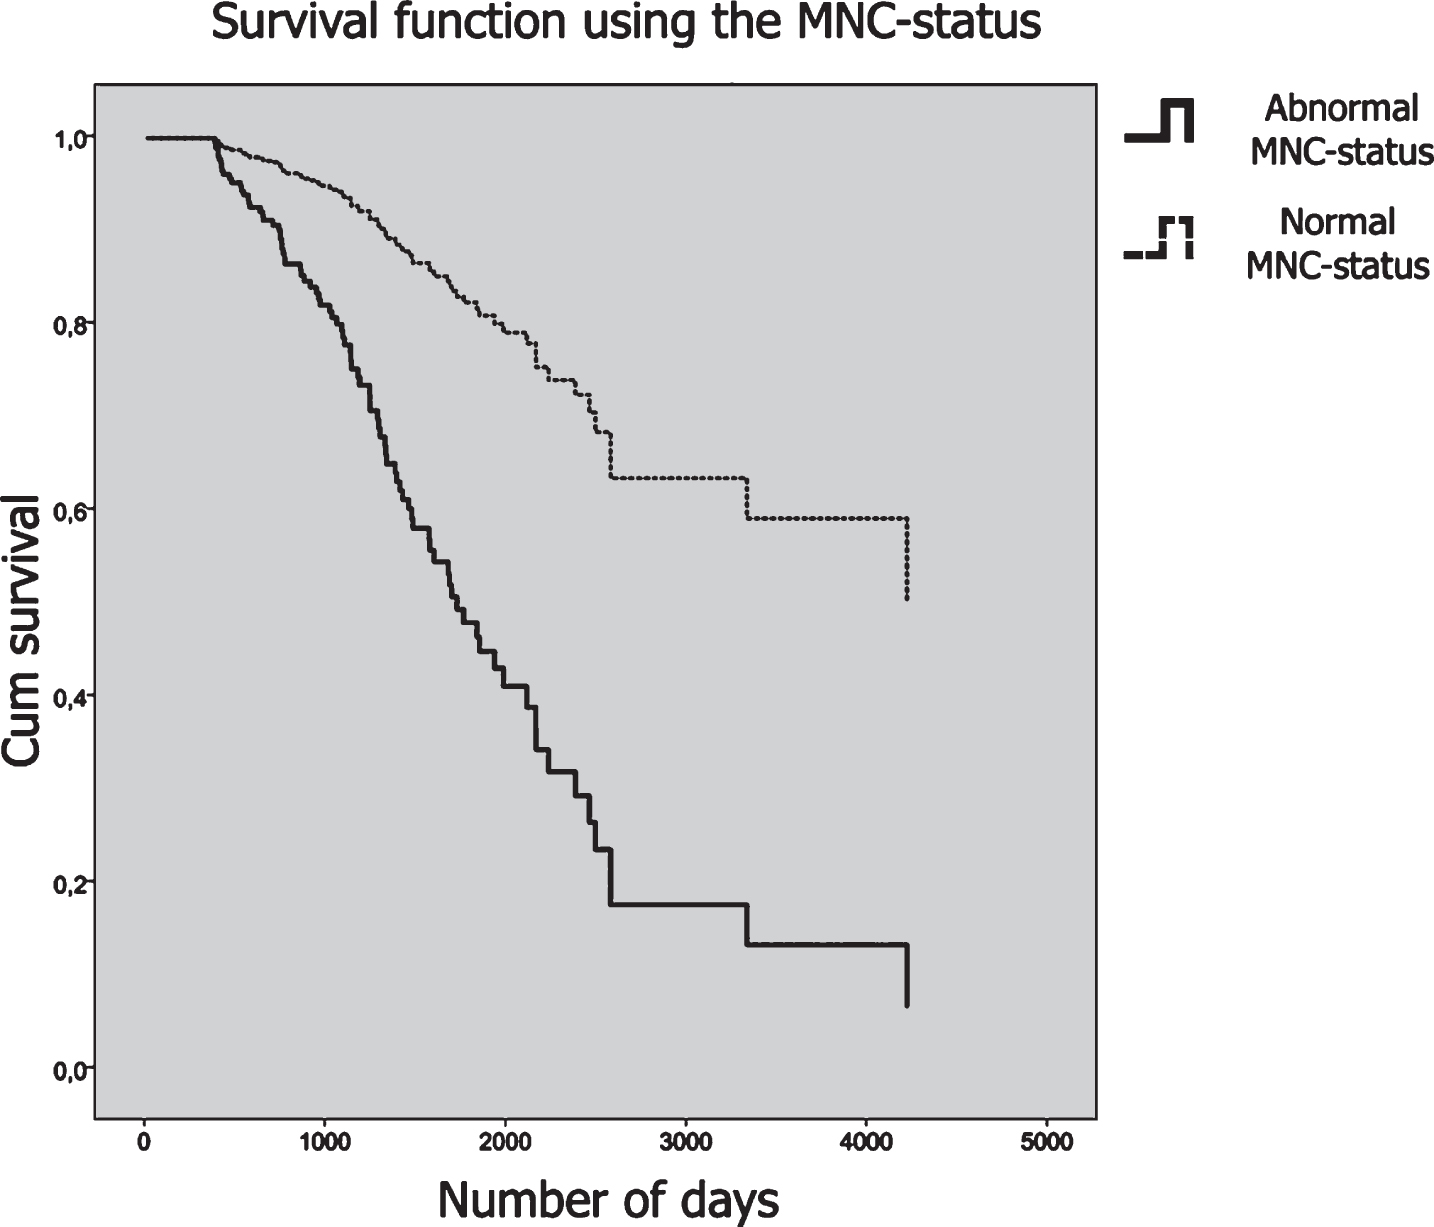 Survival curves plotted for the MNC status. Patients who had an abnormal MNC-status are plotted in a solid line, and patients with a normal MNC-status are plotted in a dashed line. The y-axis shows cumulative survival across time and the number of days is plotted on the x-axis.